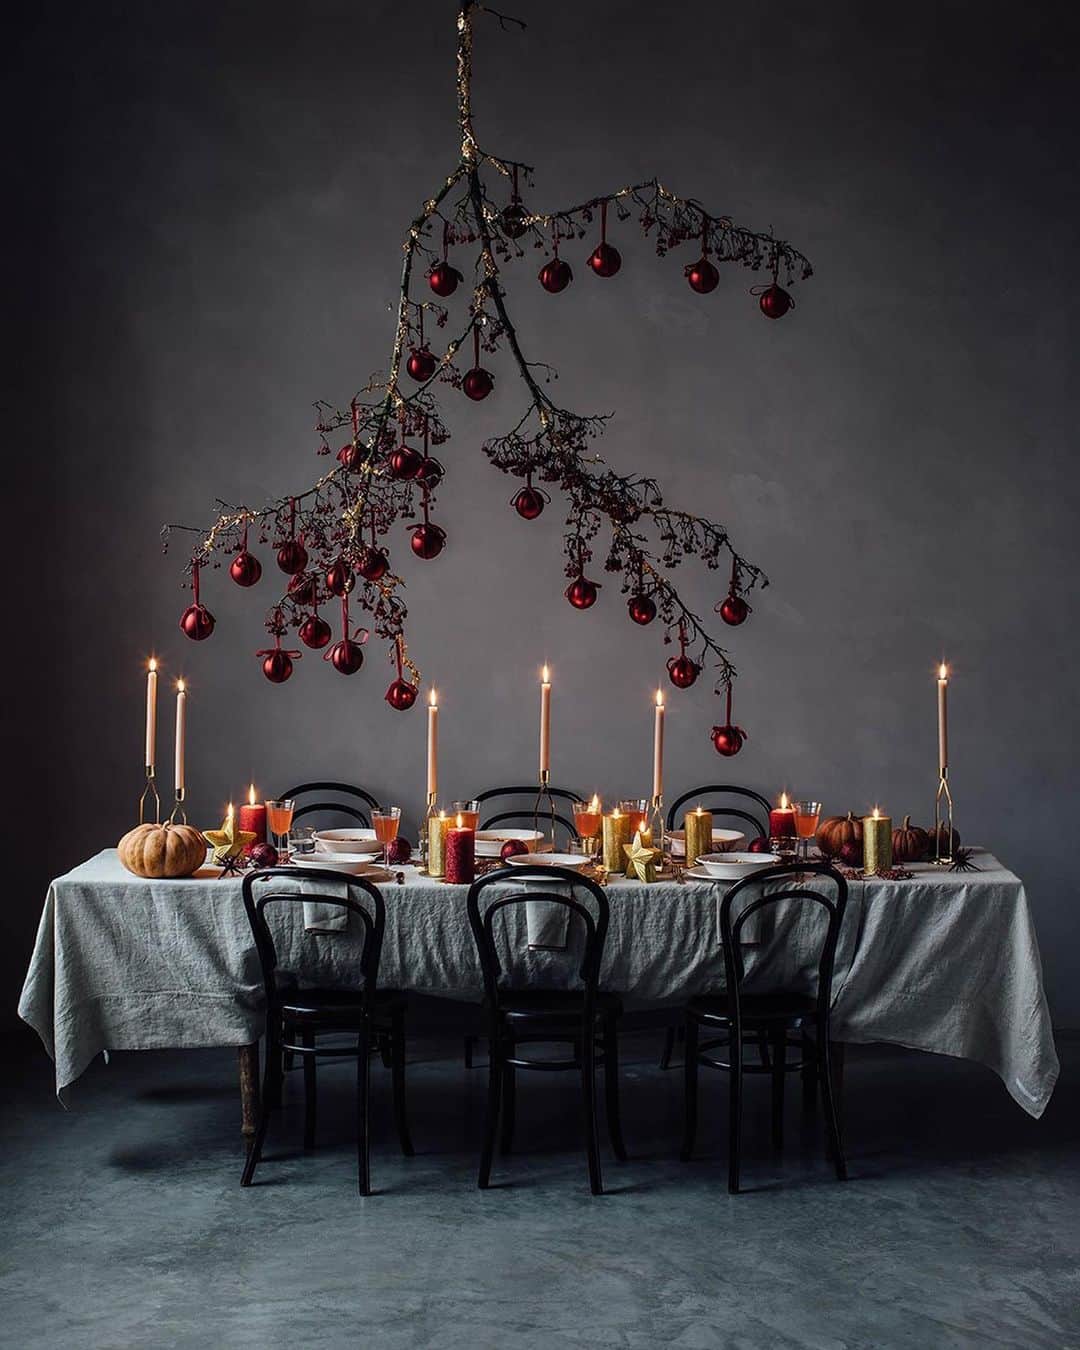 Our Food Storiesのインスタグラム：「One of our all time favorite Christmas photos 🌟 This Christmas will be different for almost everyone but we are so much looking forward to some calm and cozy days. Photographed for @zarahome with our talented friends from @ruby_marylennox ❣️#ourfoodstories ___ #christmasdecor #christmasdecorations #tablesetting #tabledecoration #tabledecor #zarahome #foodstylist #foodphotographer #germanfoodblogger #decorationideas #fellowmag #verilymoment #simplejoys」